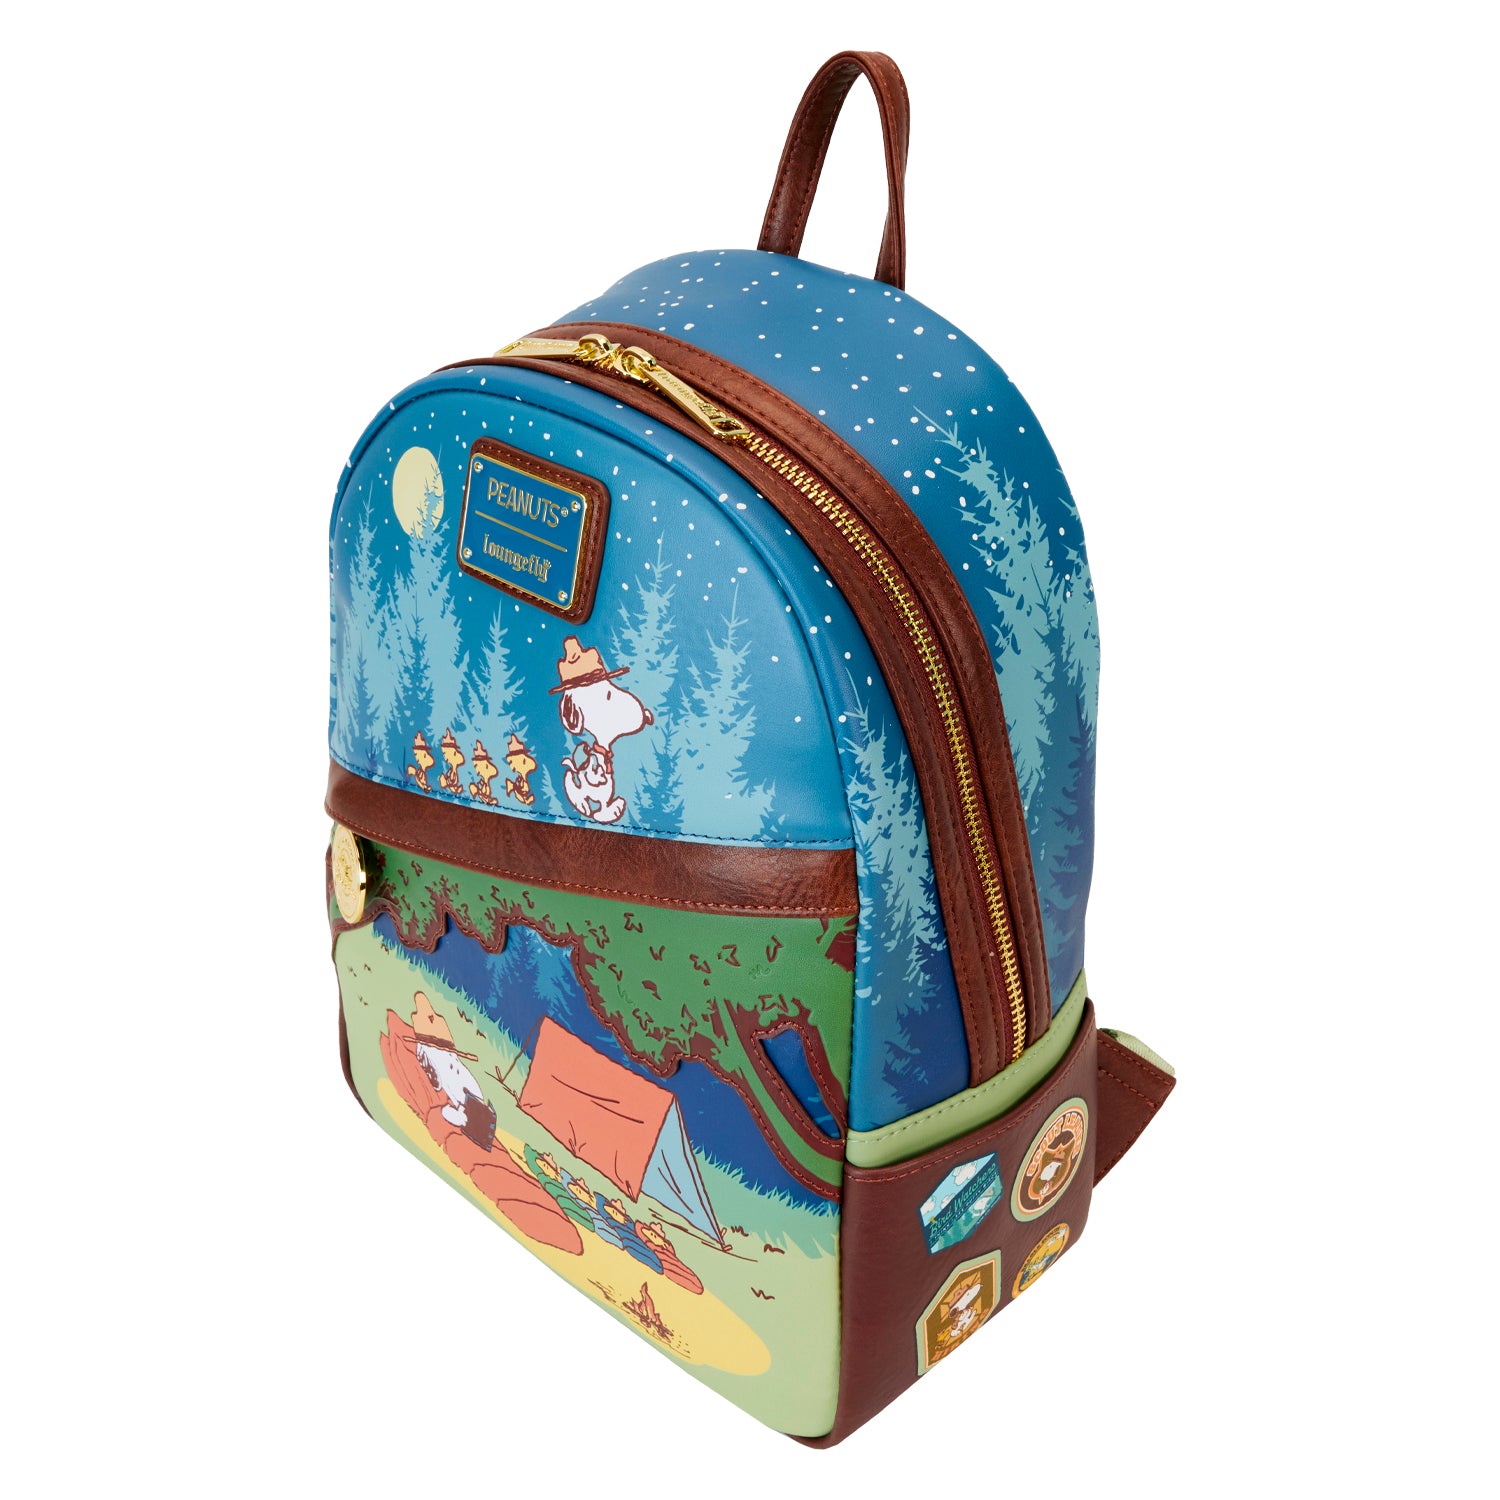 Loungefly Peanuts Beagle Scouts 50th Anniversary Mini Backpack